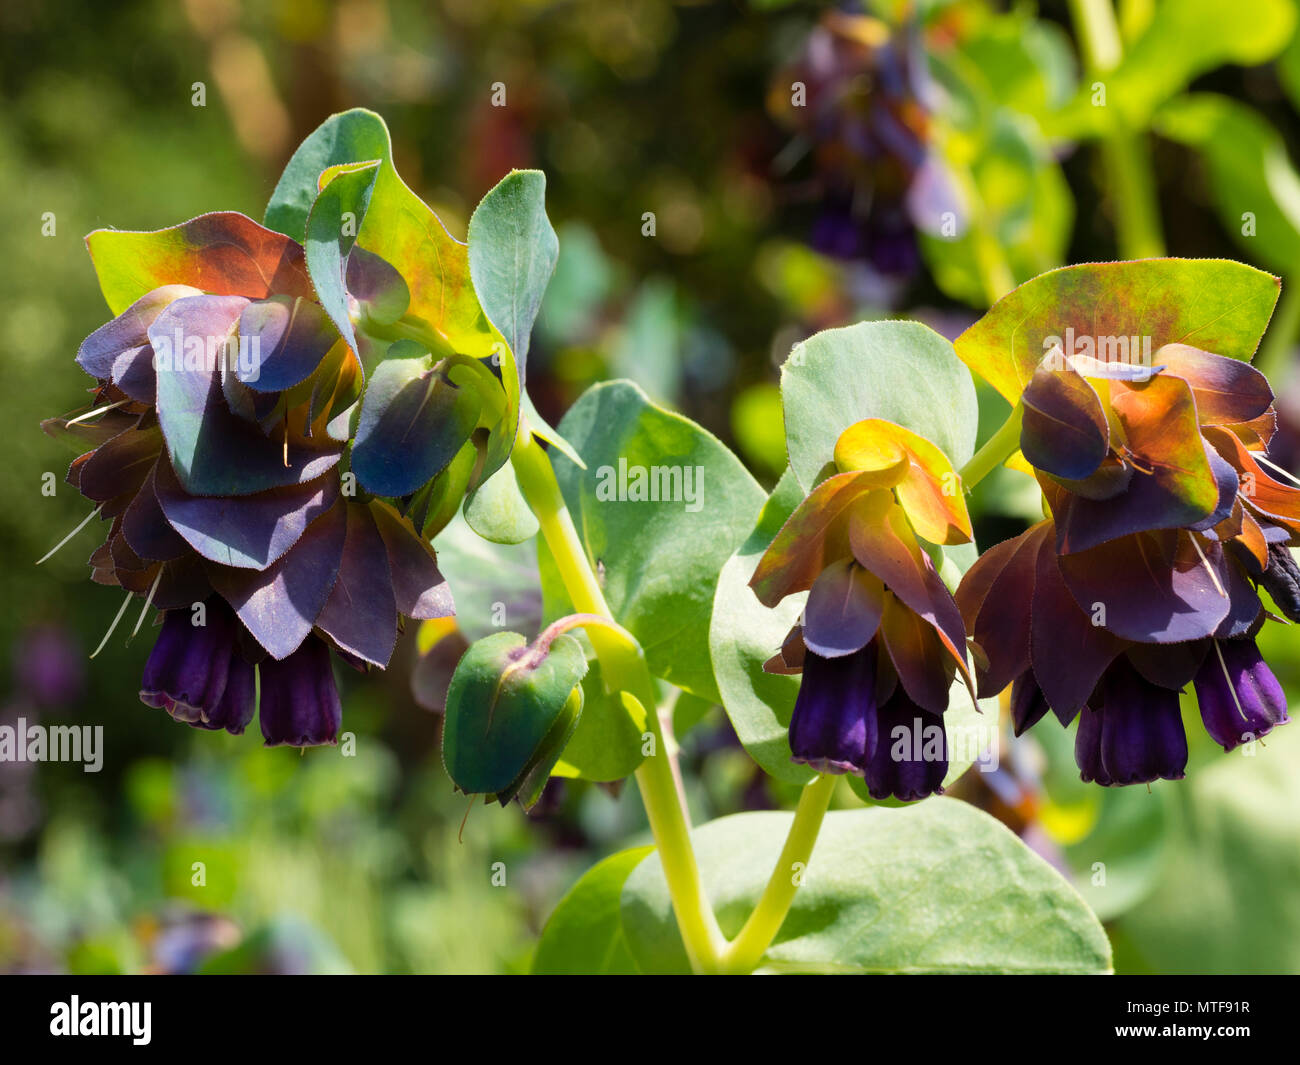 Blue -green foliage, darker bracts and purple flowers of the summer blooming annual Honeywort, Cerinthe major 'Purpurascens' Stock Photo